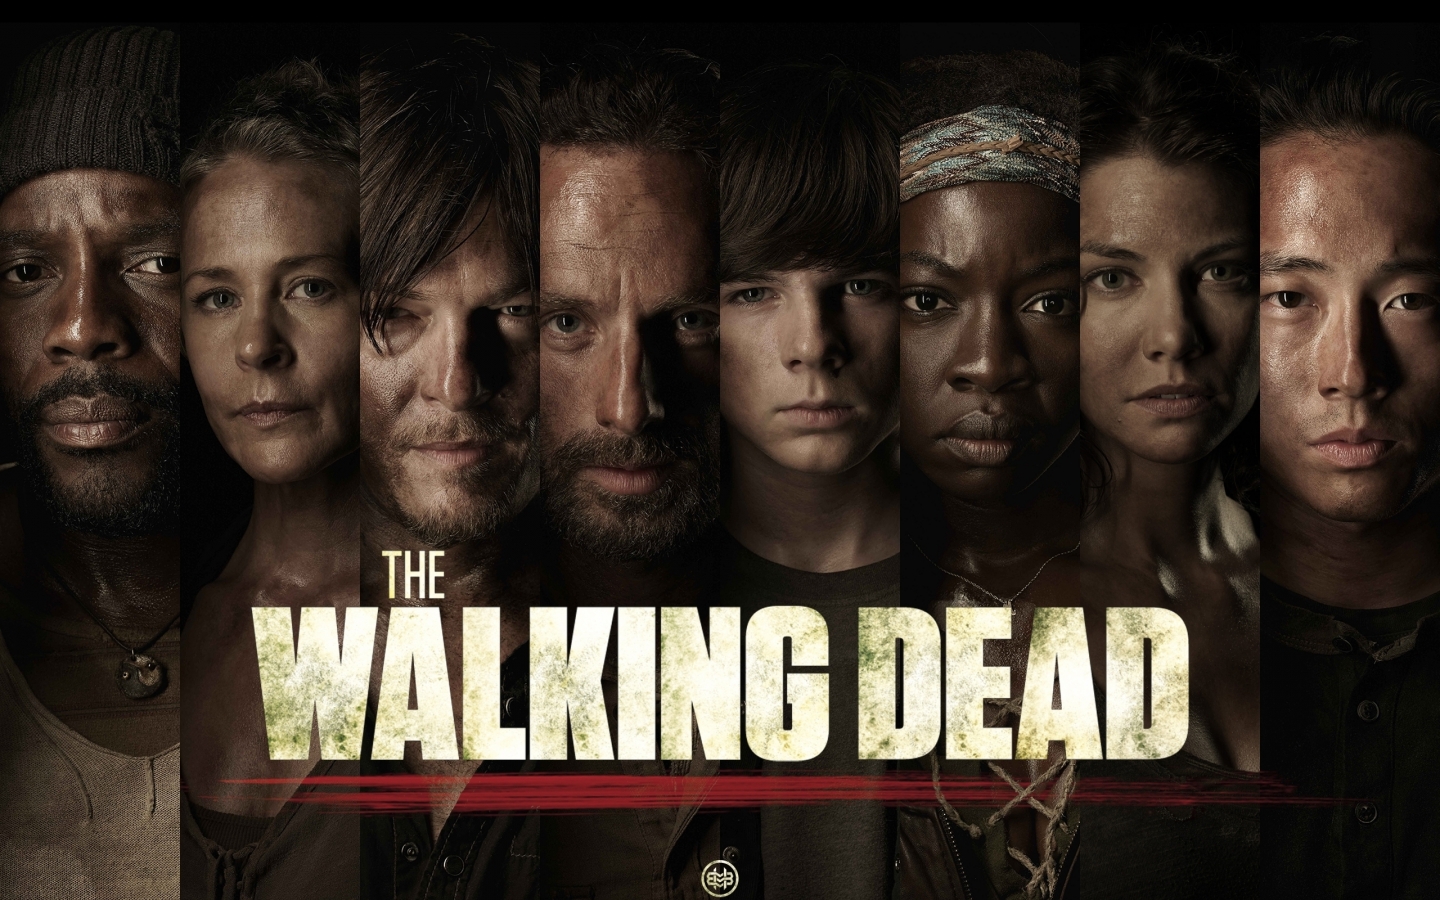 The Walking Dead Characters Poster for 1440 x 900 widescreen resolution